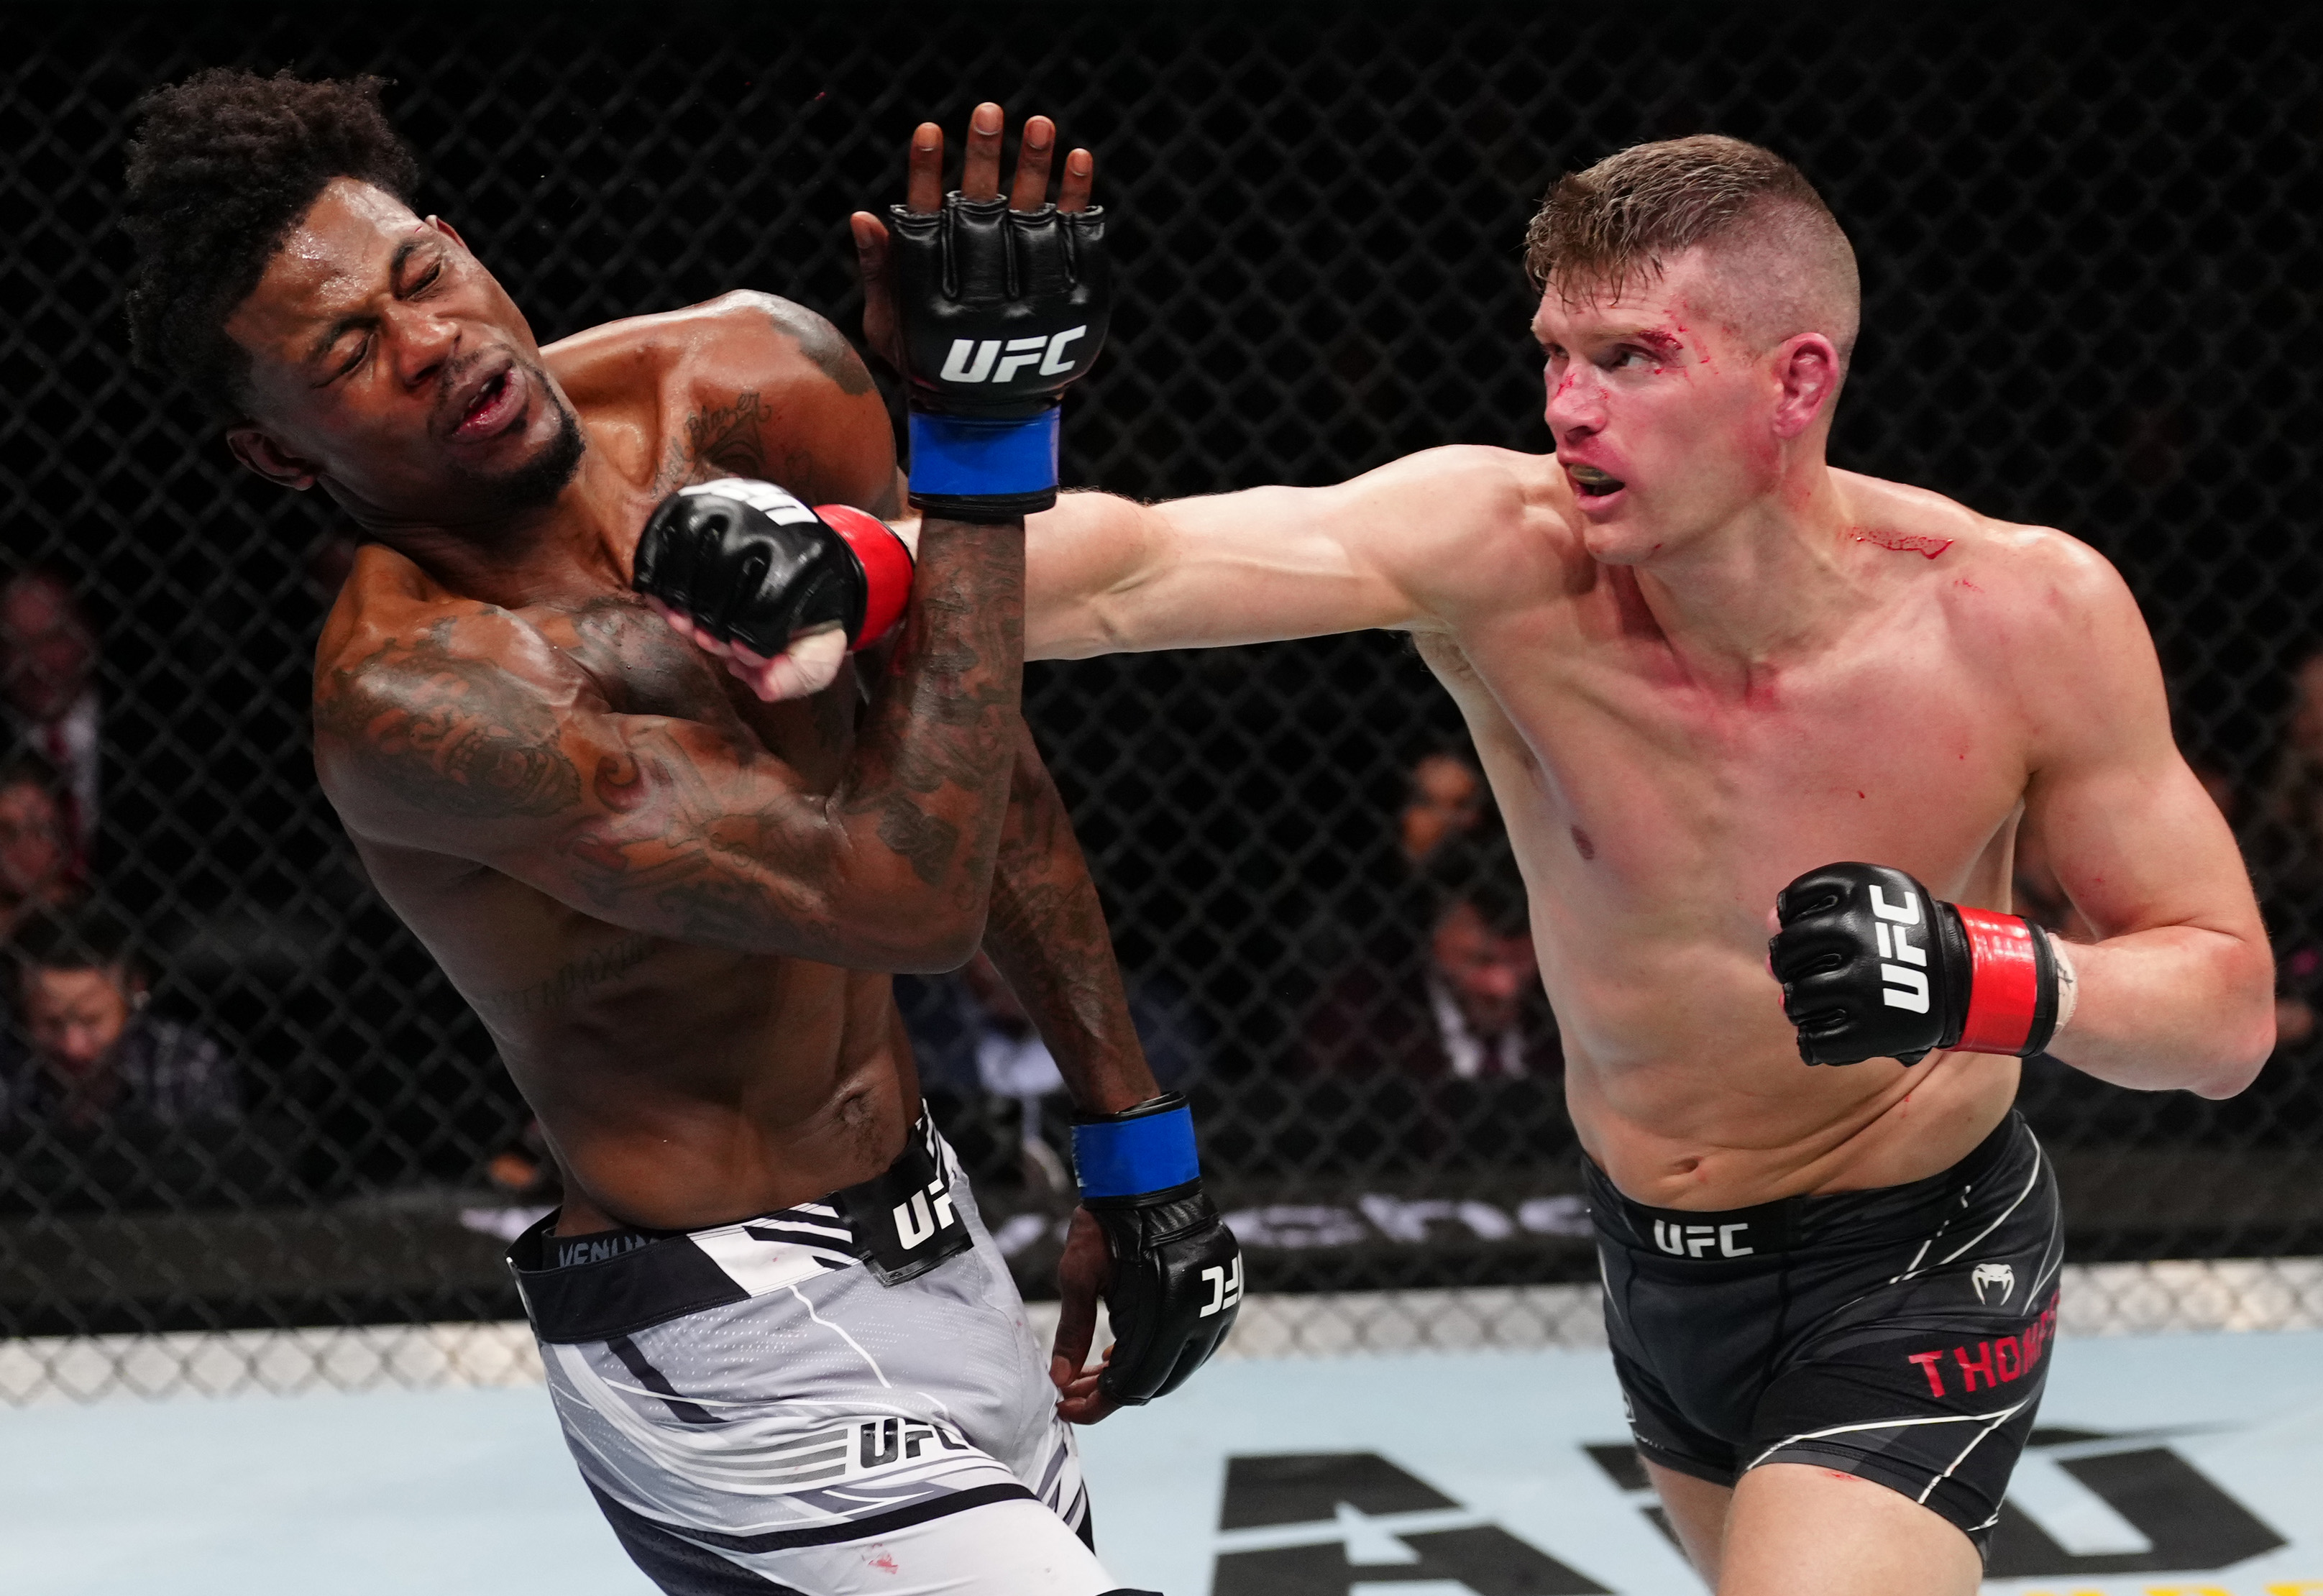 Stephen Thompson TKO’d Kevin Holland by corner stoppage in the UFC Orlando main event